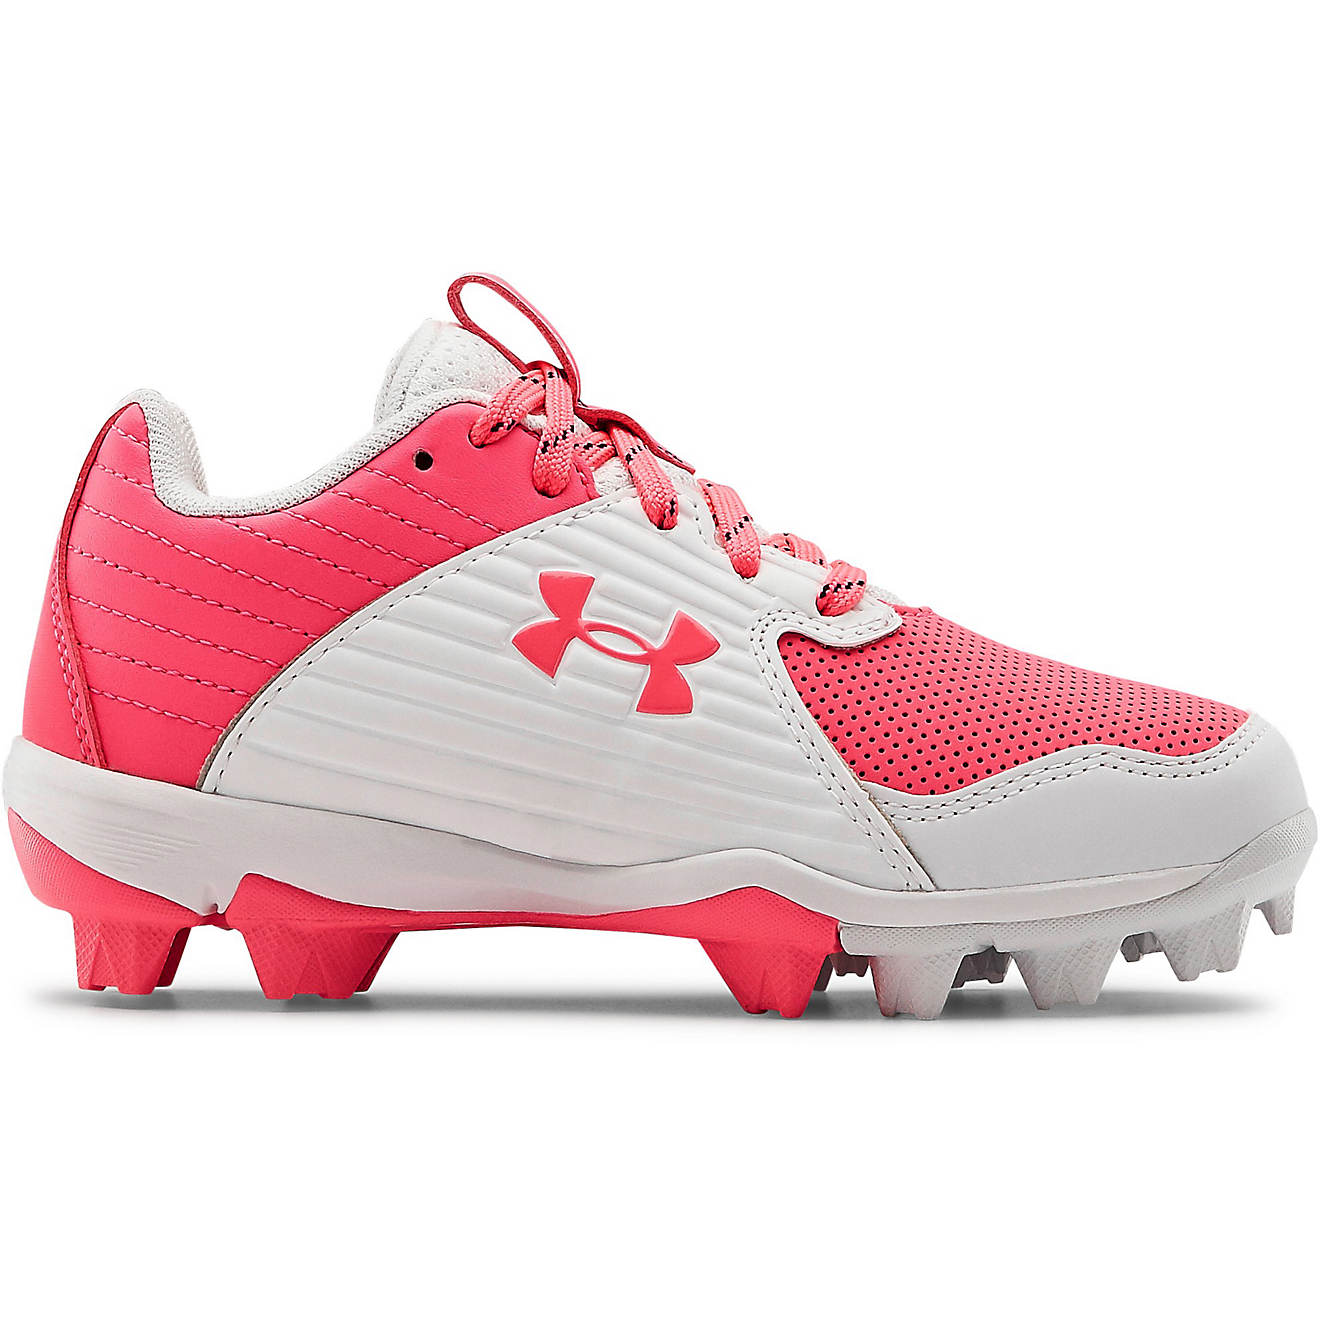 Under Armour Youth Kids Leadoff Low RM J Pink Baseball Cleats Shoes 1297316-002 